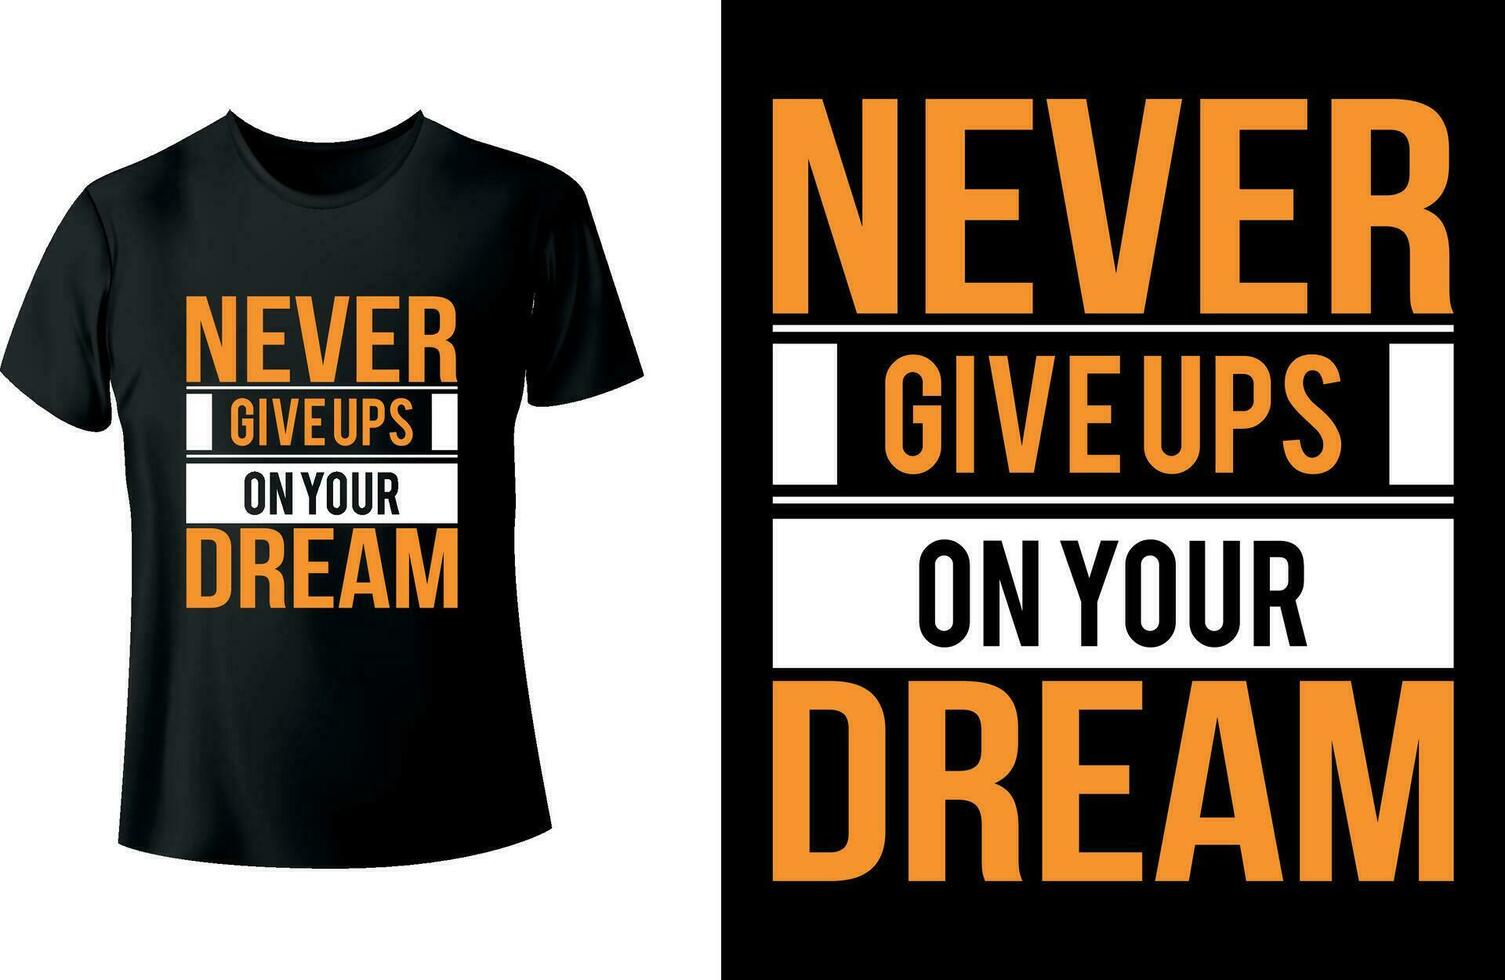 Never give ups on your dream Typography T shirt Design vector